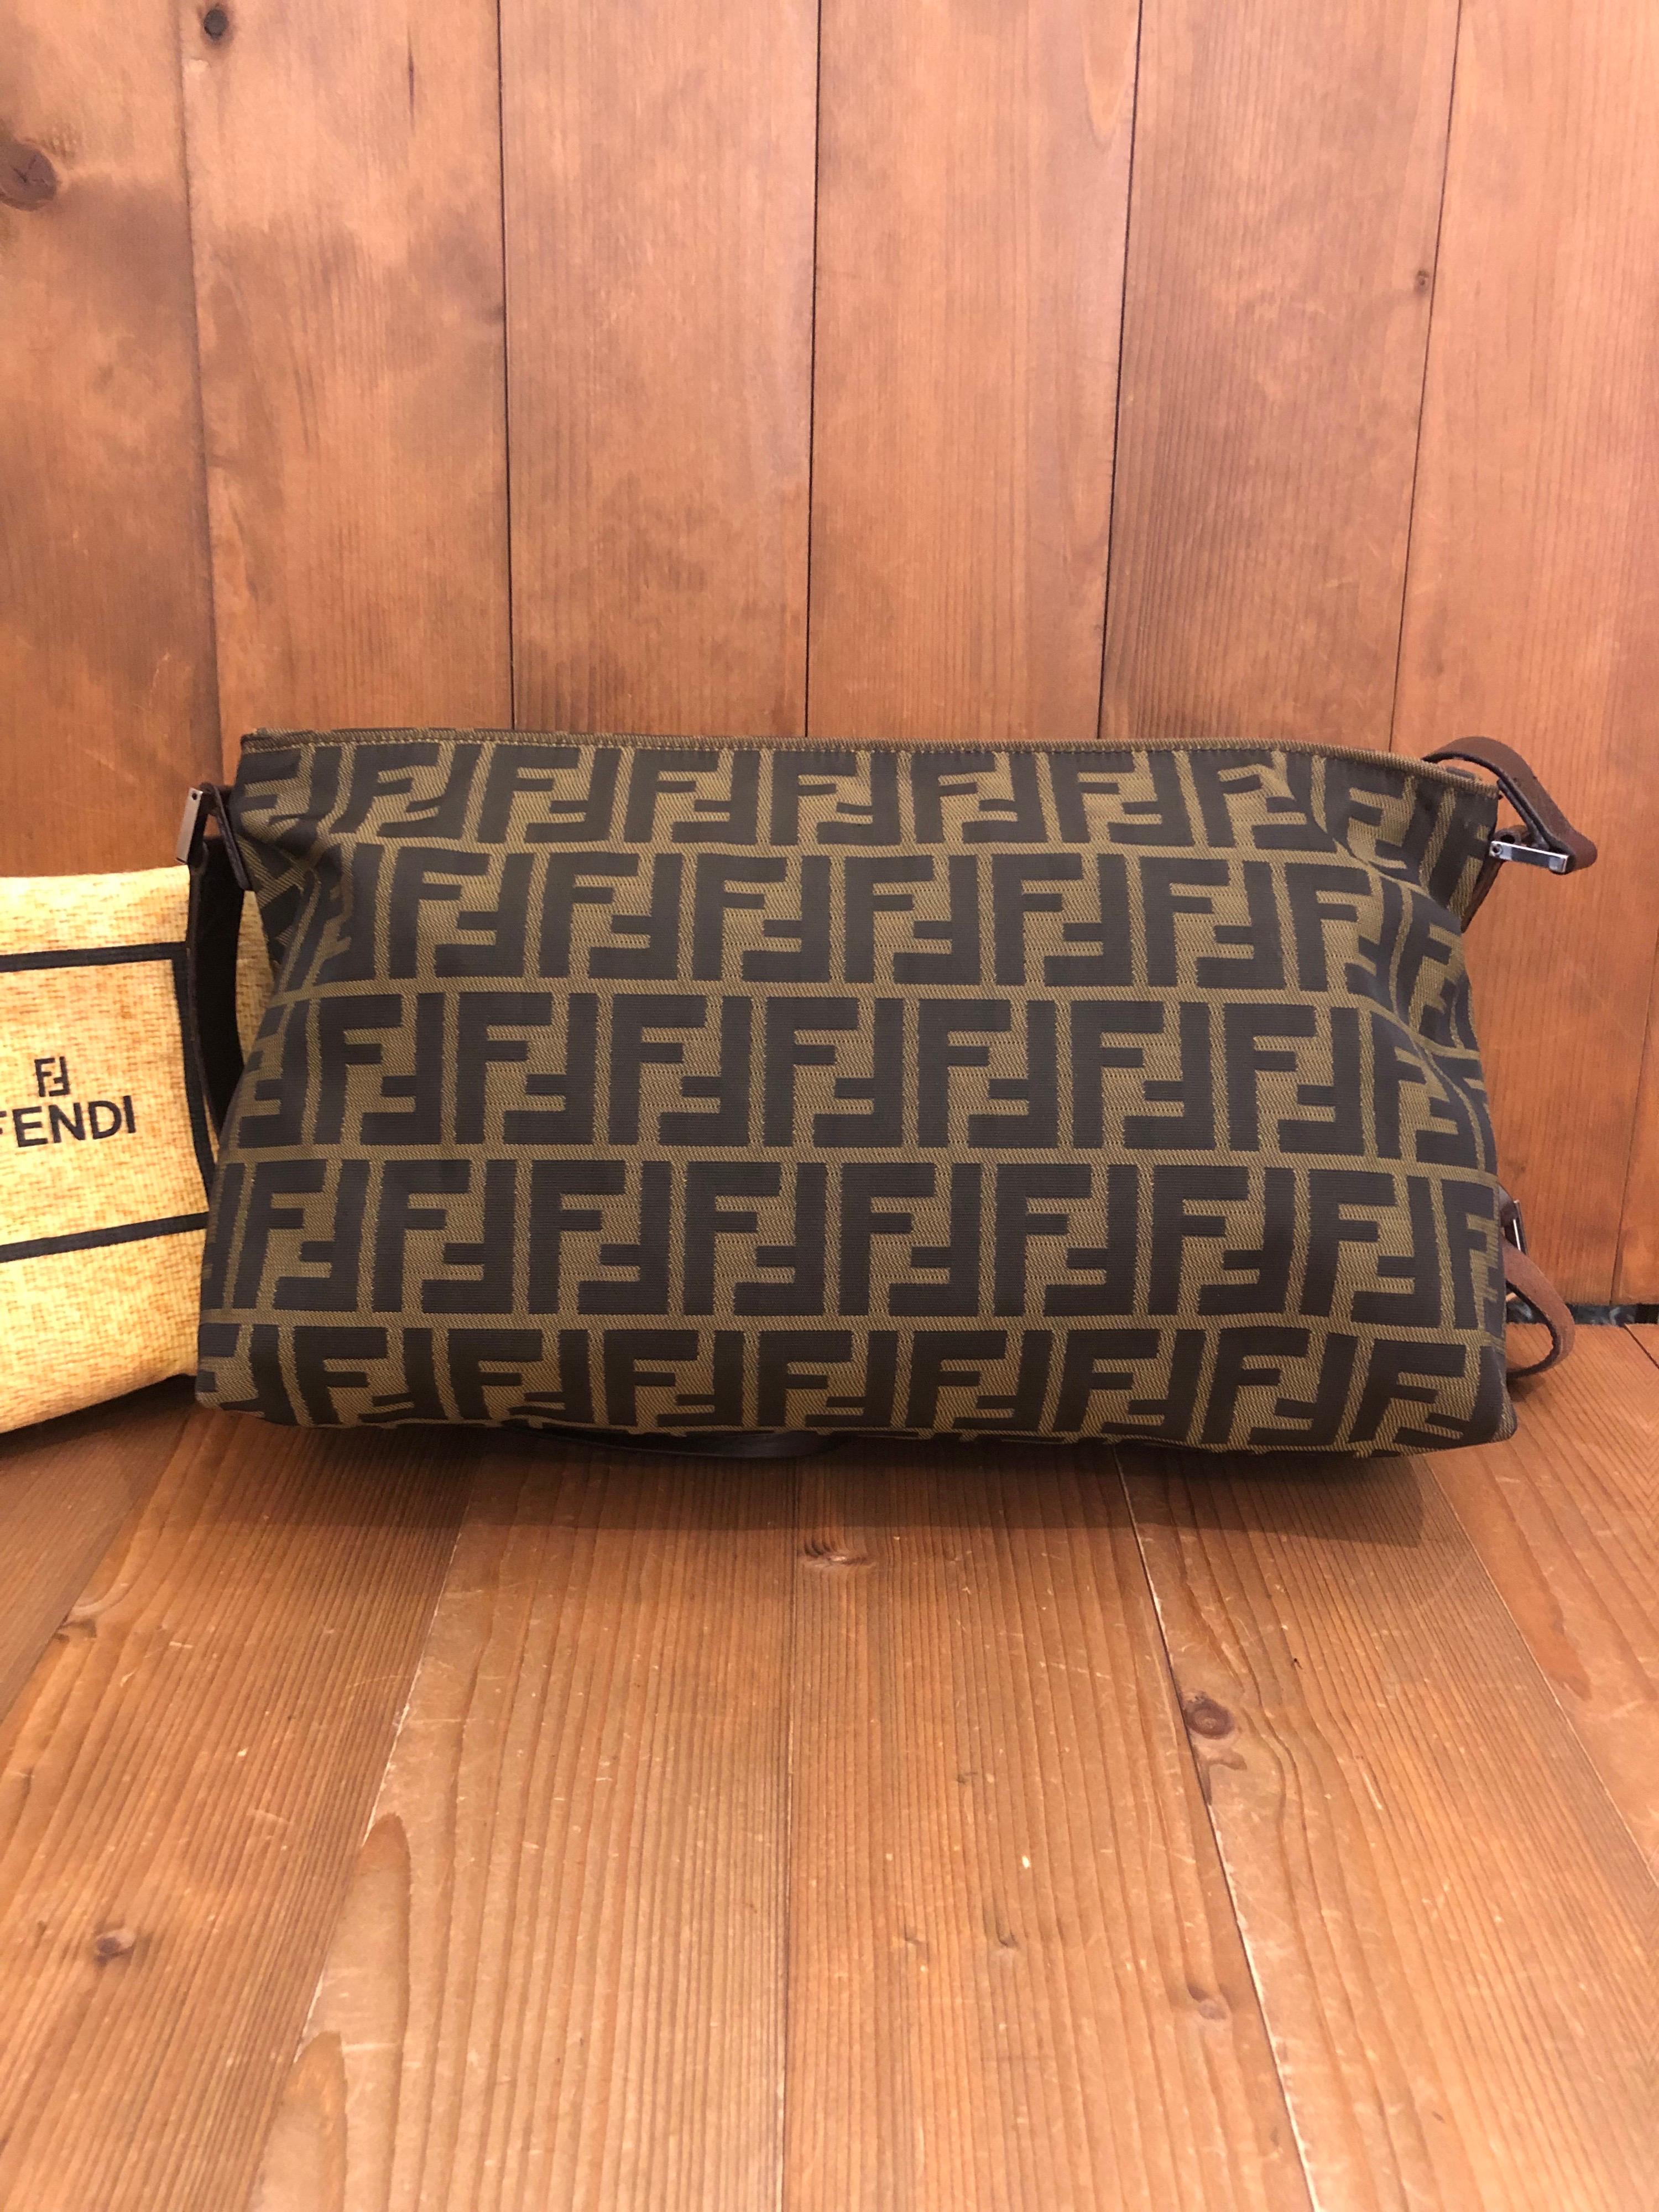 1990s FENDI Brown Zucca Jacquard Crossbody Bag with leather shoulder strap featuring one interior zip pocket. Made in Italy. Measures 14 x 7.5 x 4.75 inches Drop 17 inches. Comes with dust bag. 

Condition - minor signs of wear. Generally in very